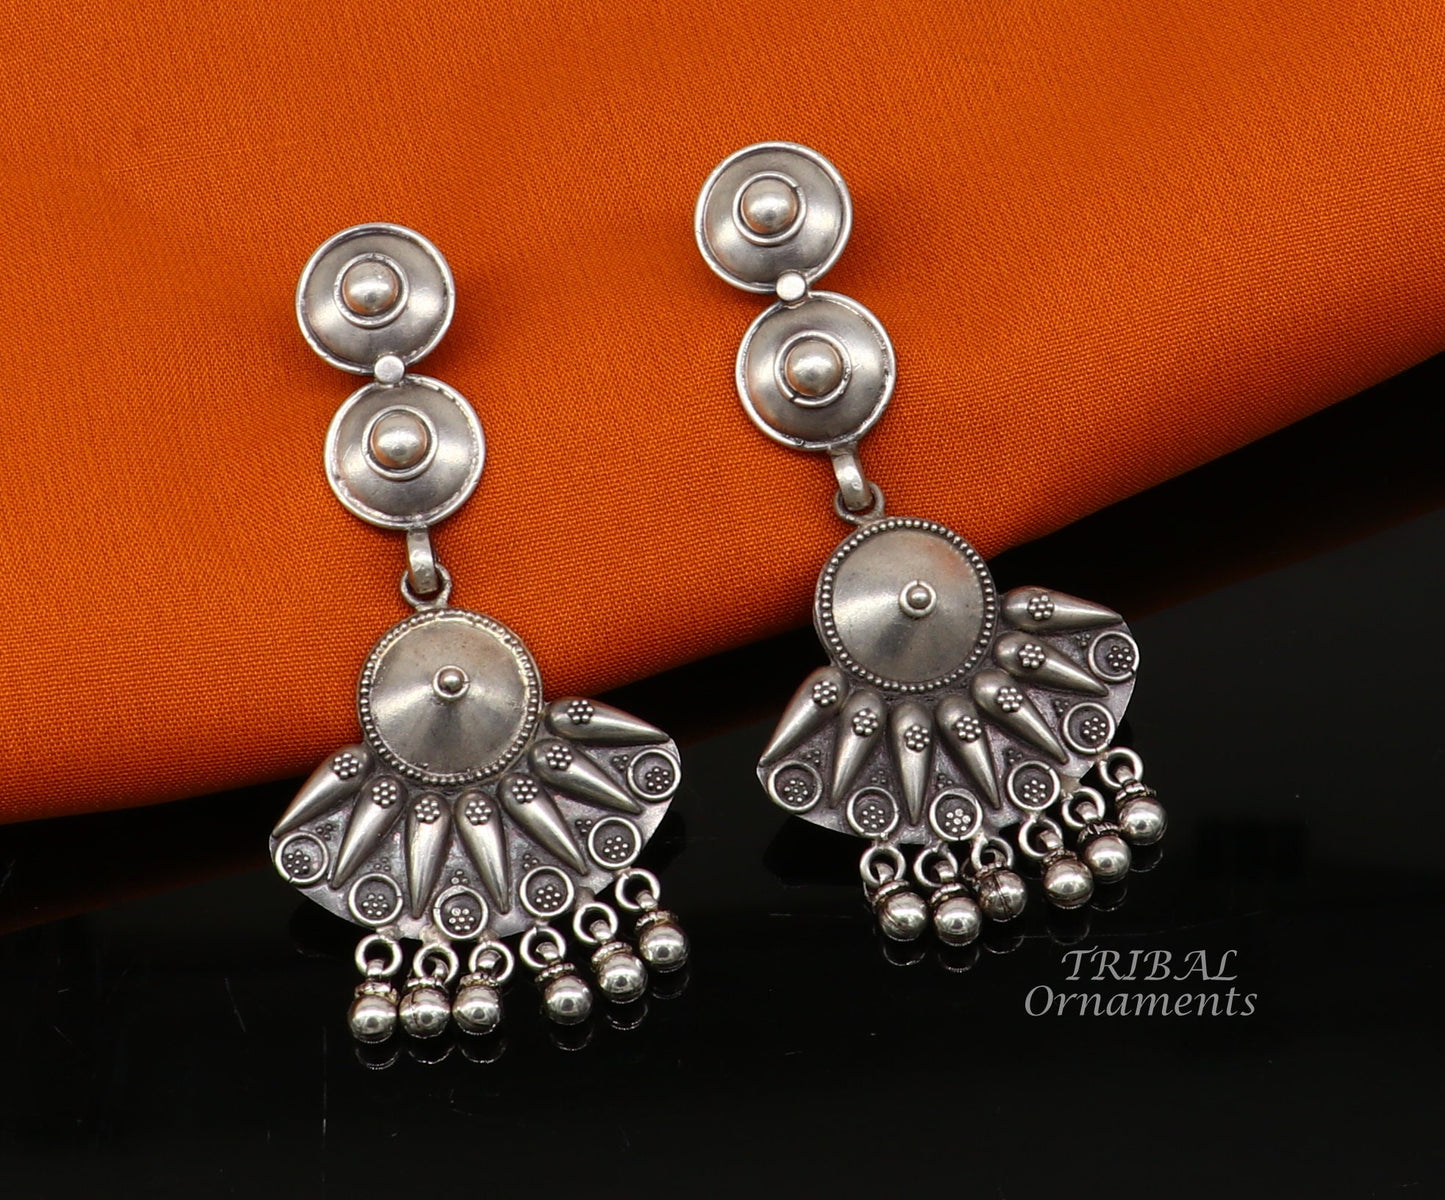 925 Sterling silver handmade flower design stud earrings with drops, excellent customized penalized bridesmaid girls jewelry gifting s1074 - TRIBAL ORNAMENTS